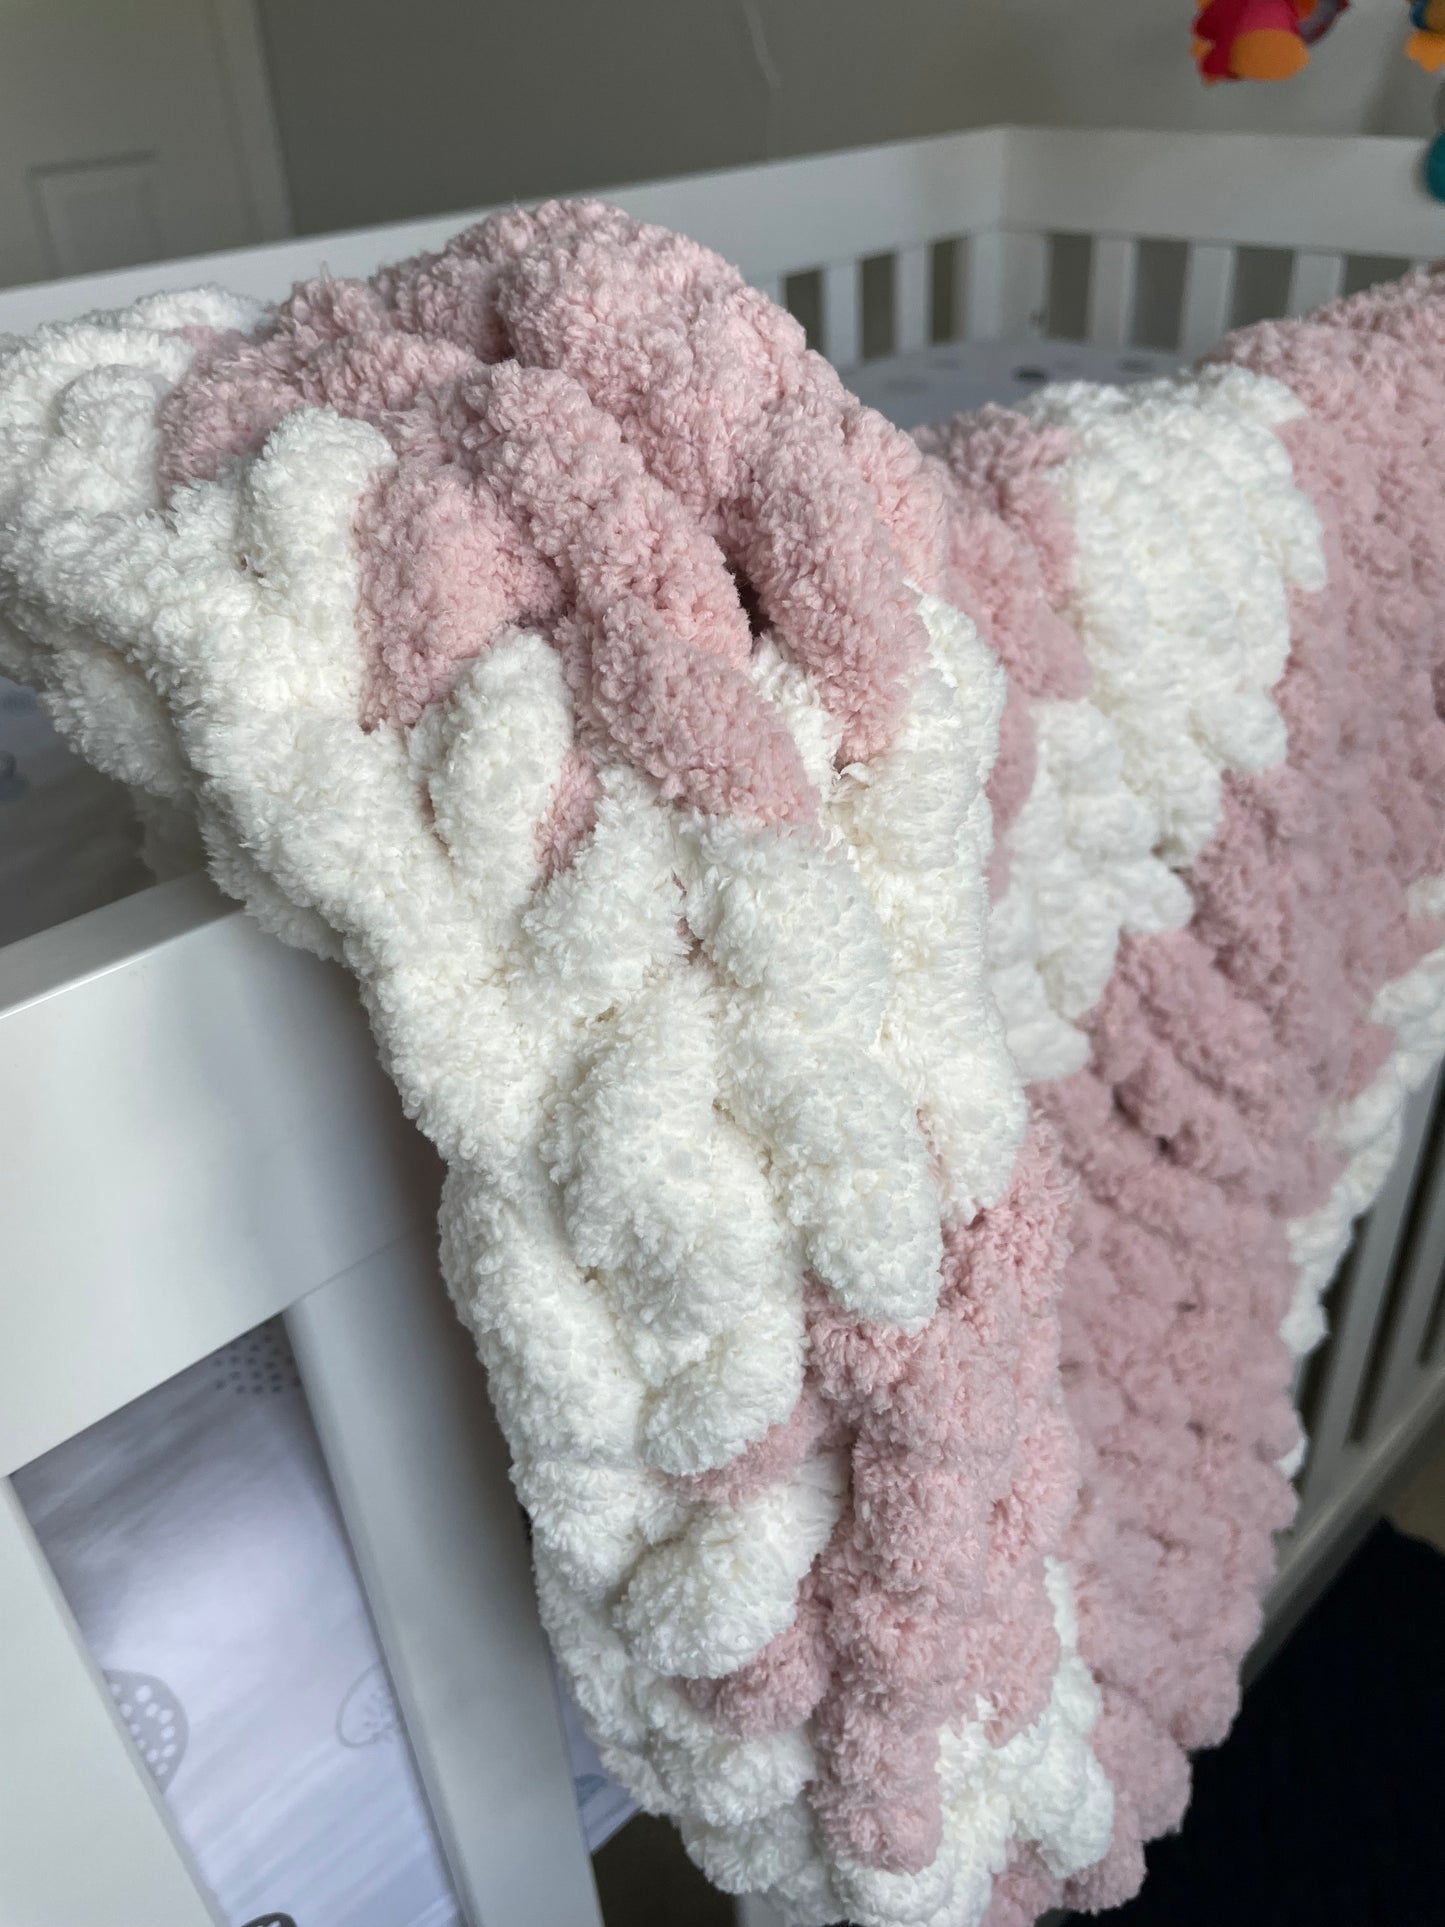 Healing Hand, Chunky Knit Baby Blankets - Soft Pink & White Stripe with a white edge